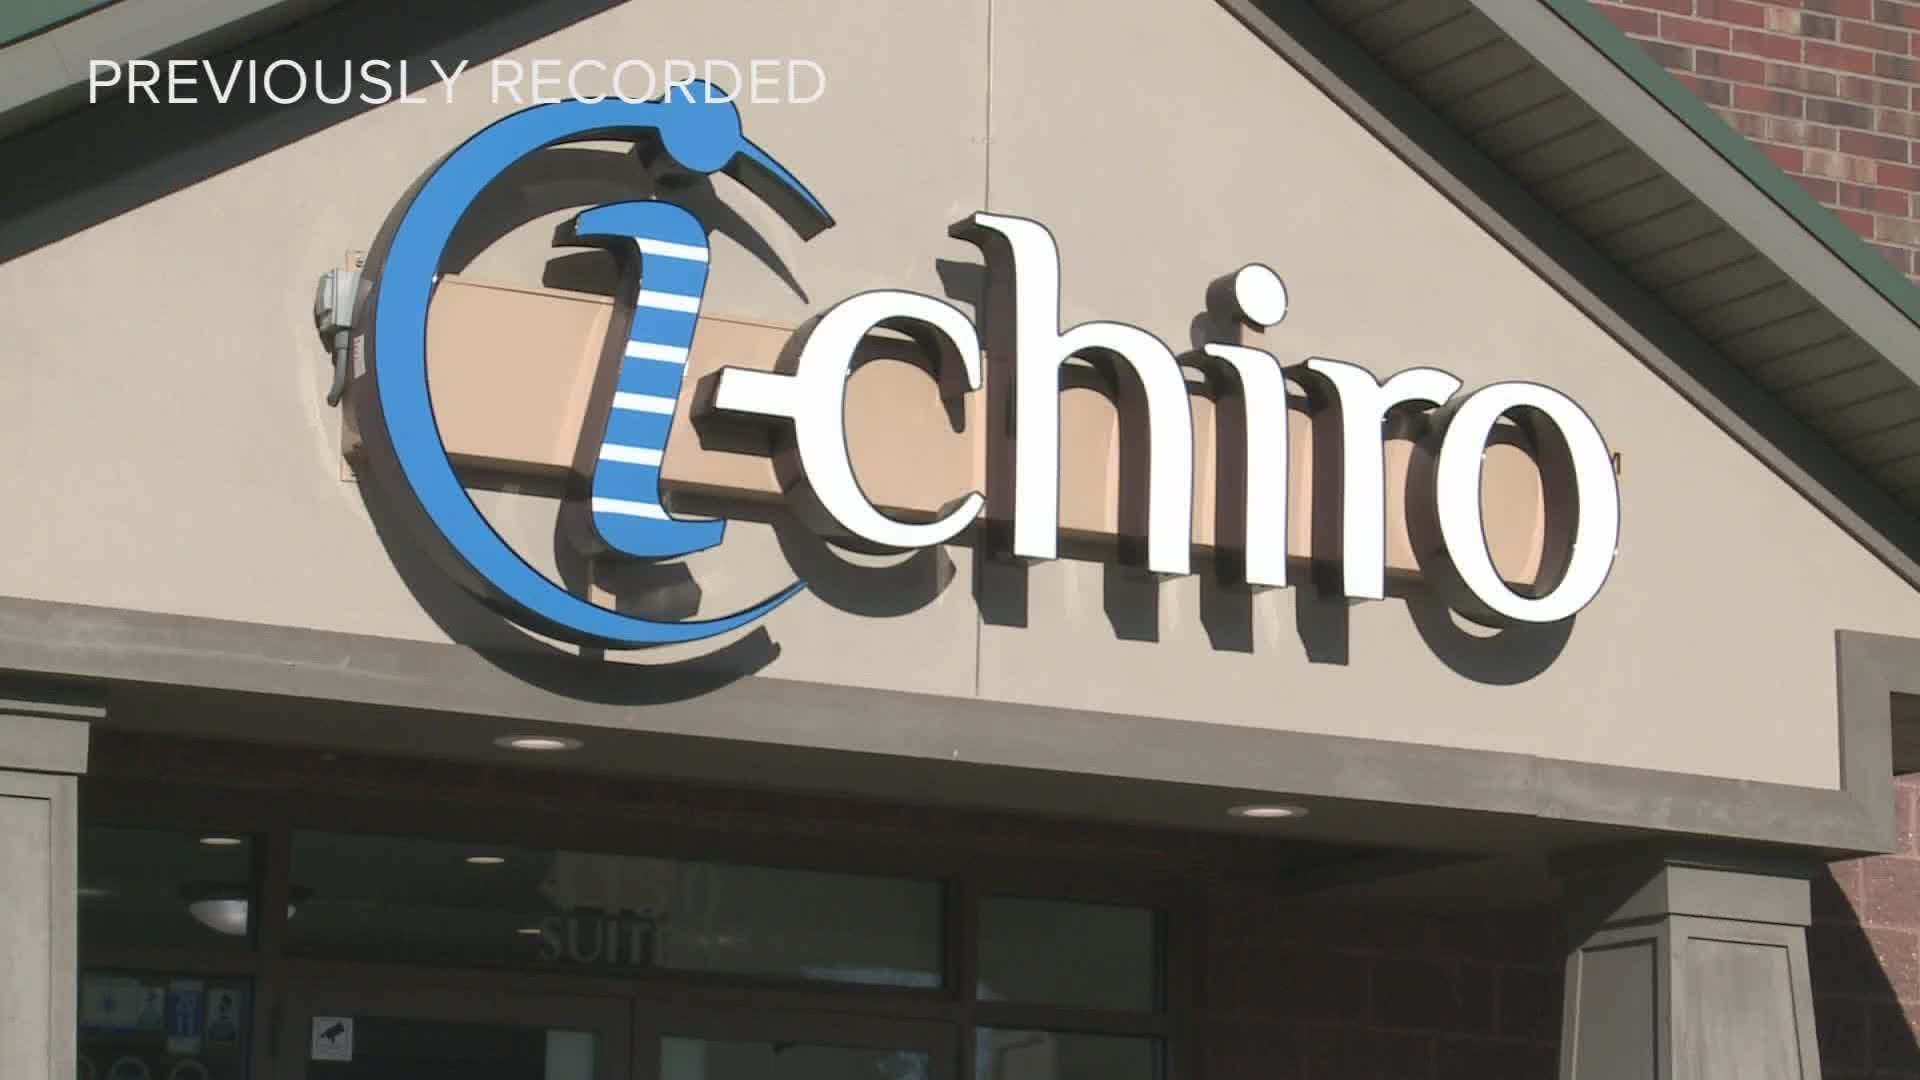 Patients who visit iChiro Clinics have access to the latest chiropractic technology, for both the diagnosis and treatment of pain or impaired mobility.